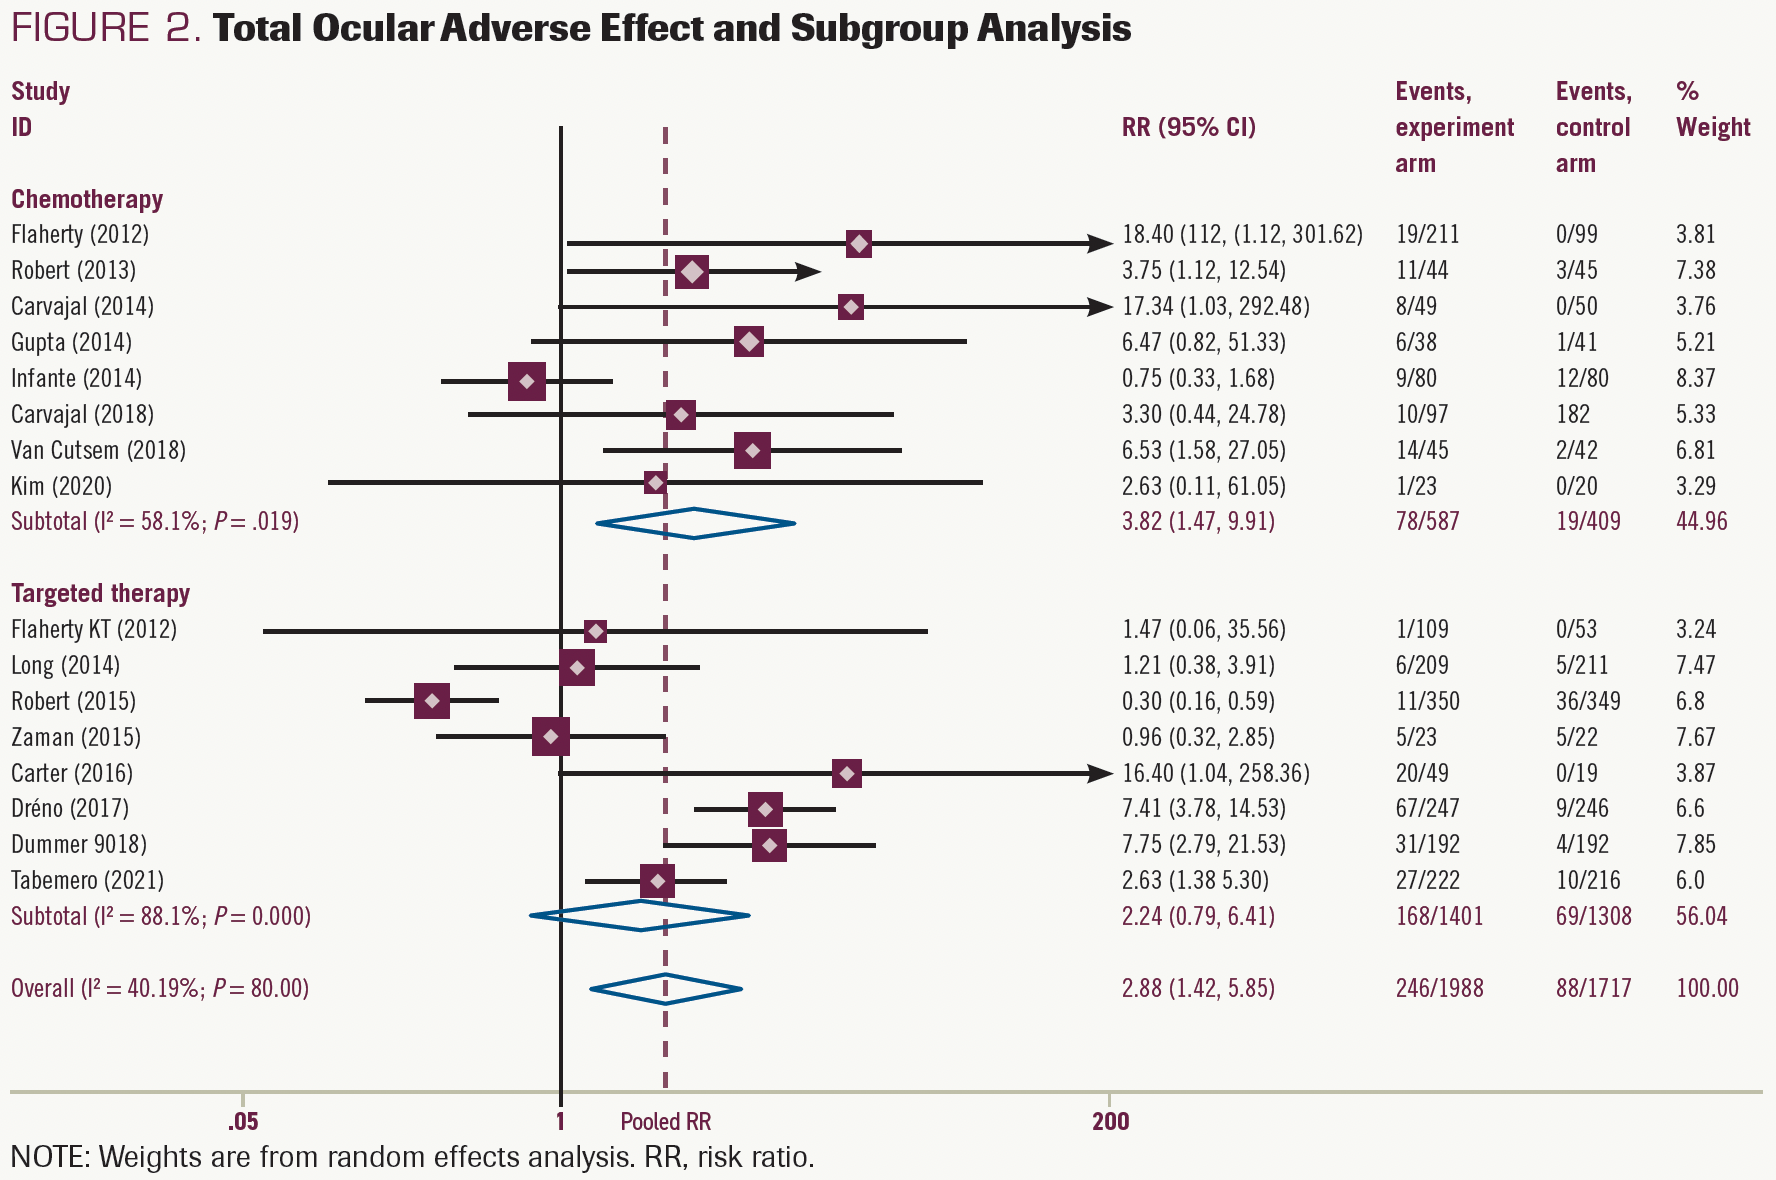 FIGURE 2. Total Ocular Adverse Effect and Subgroup Analysis